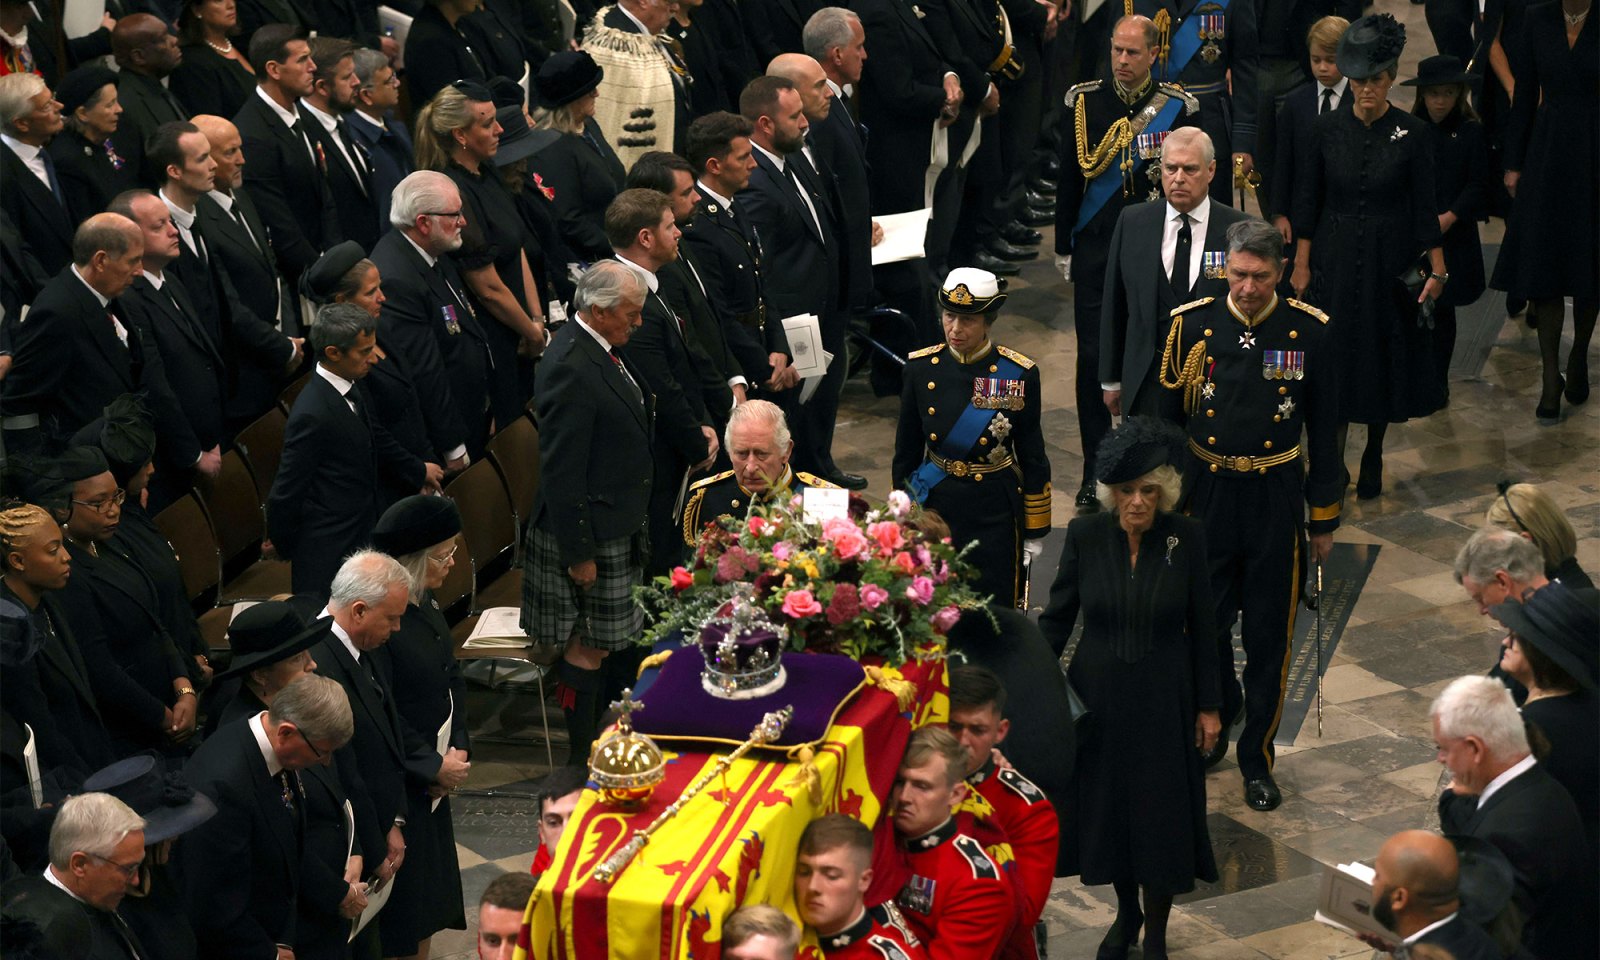 Royal Family Walk Behind Queen Elizabeth’s Coffin During Funeral Procession